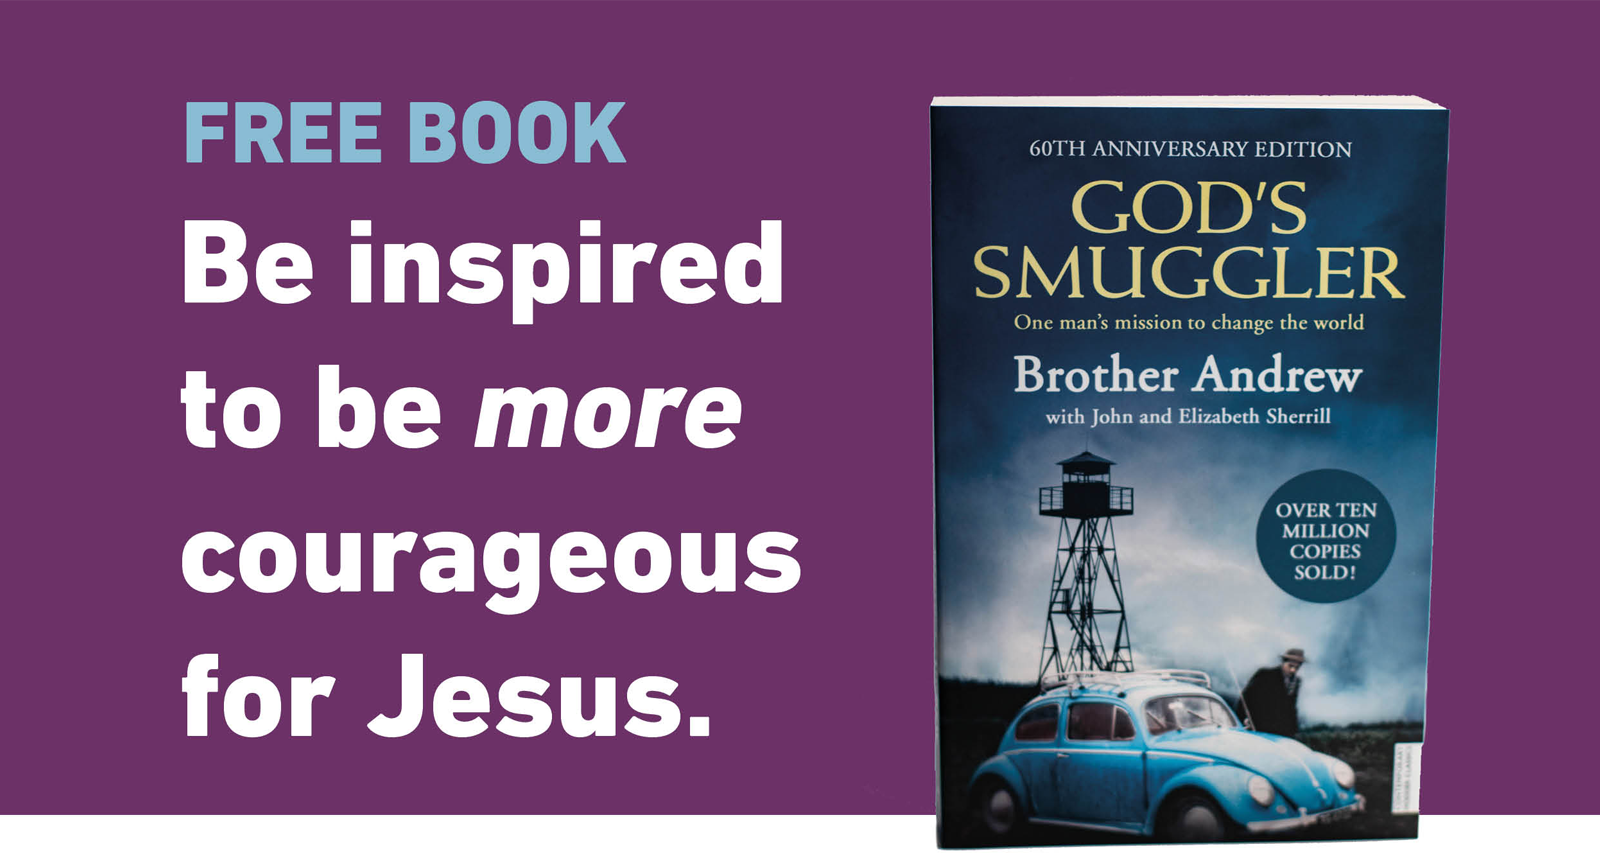 FREE BOOK Be inspired to be more courageous for Jesus with 'God's Smuggler' by Brother Andrew.